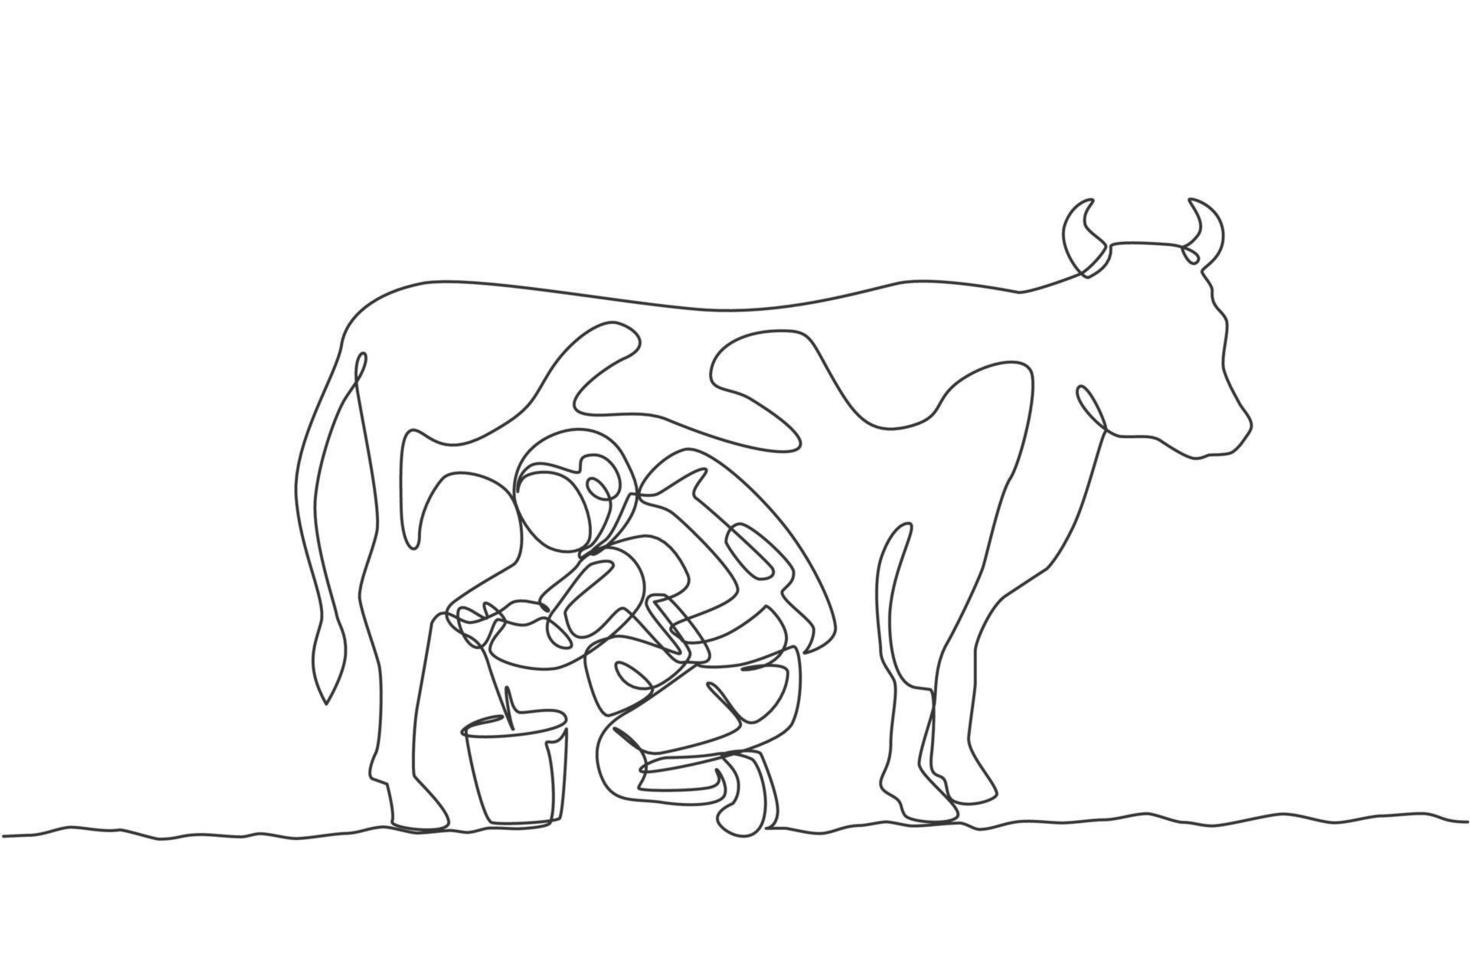 One single line drawing of astronaut squat down milking cow and put into milk can bucket in moon surface graphic vector illustration. Outer space farming concept. Modern continuous line draw design